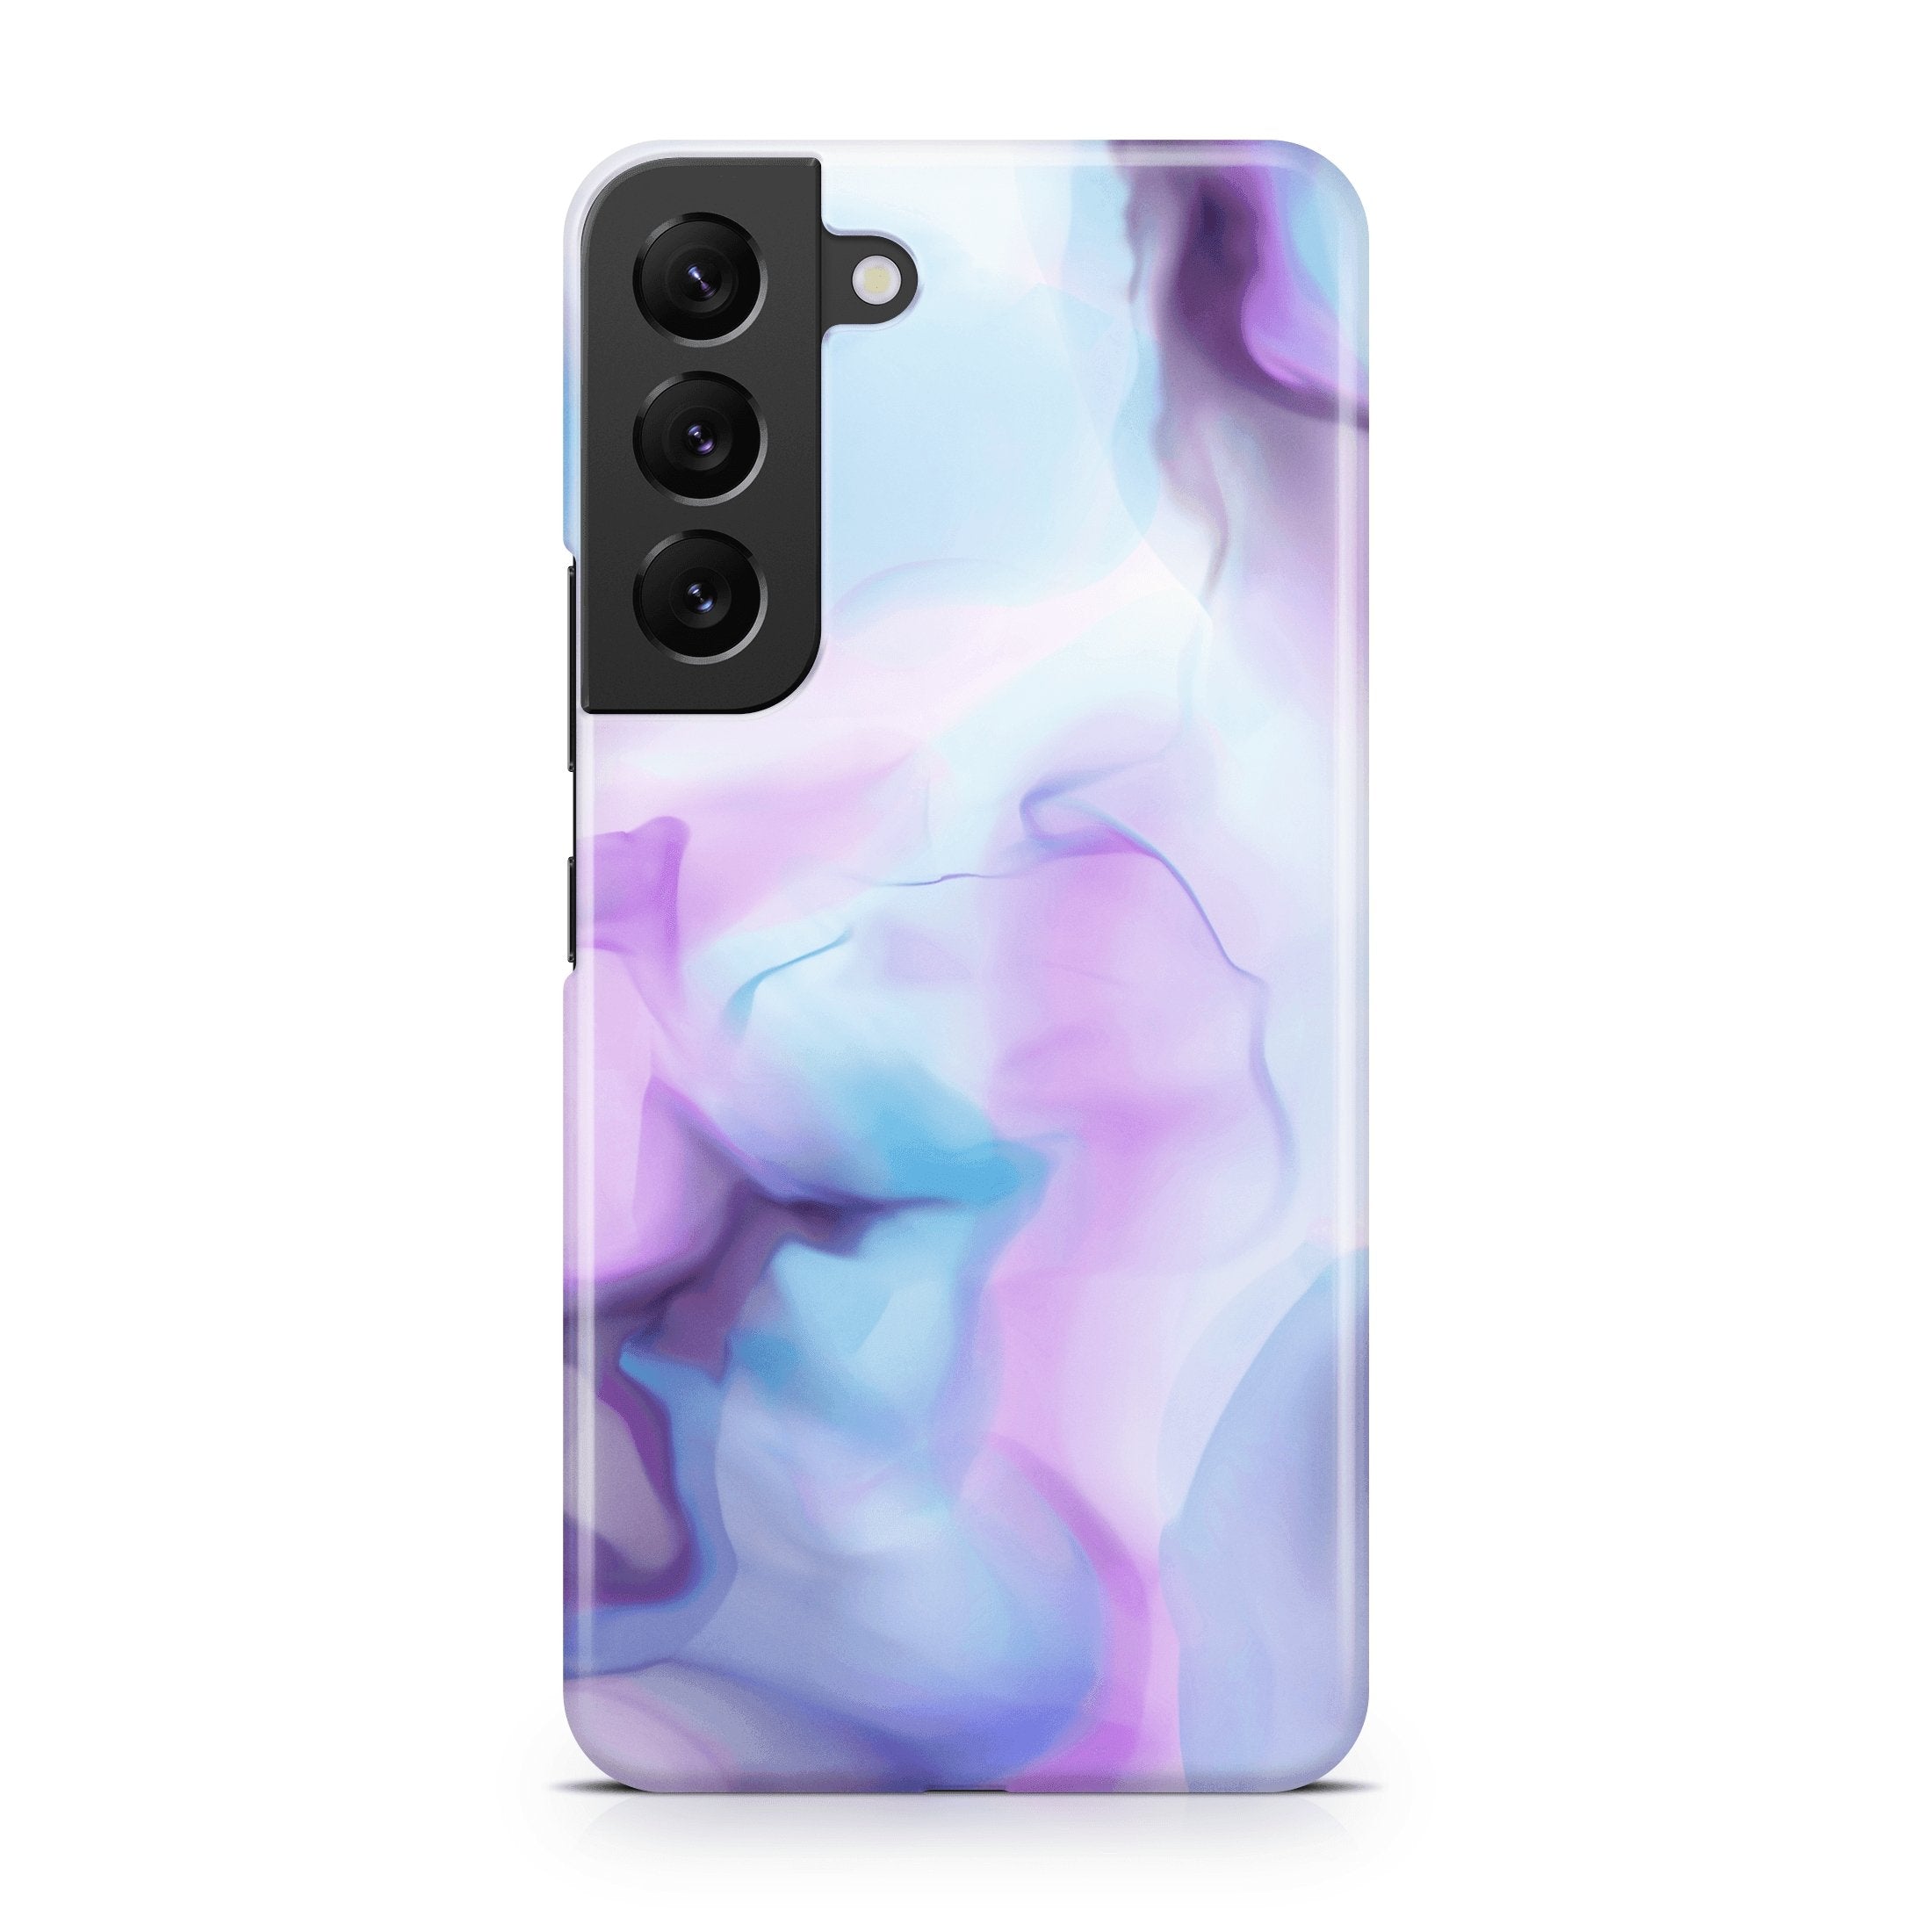 Tropical Fluid III - Samsung phone case designs by CaseSwagger